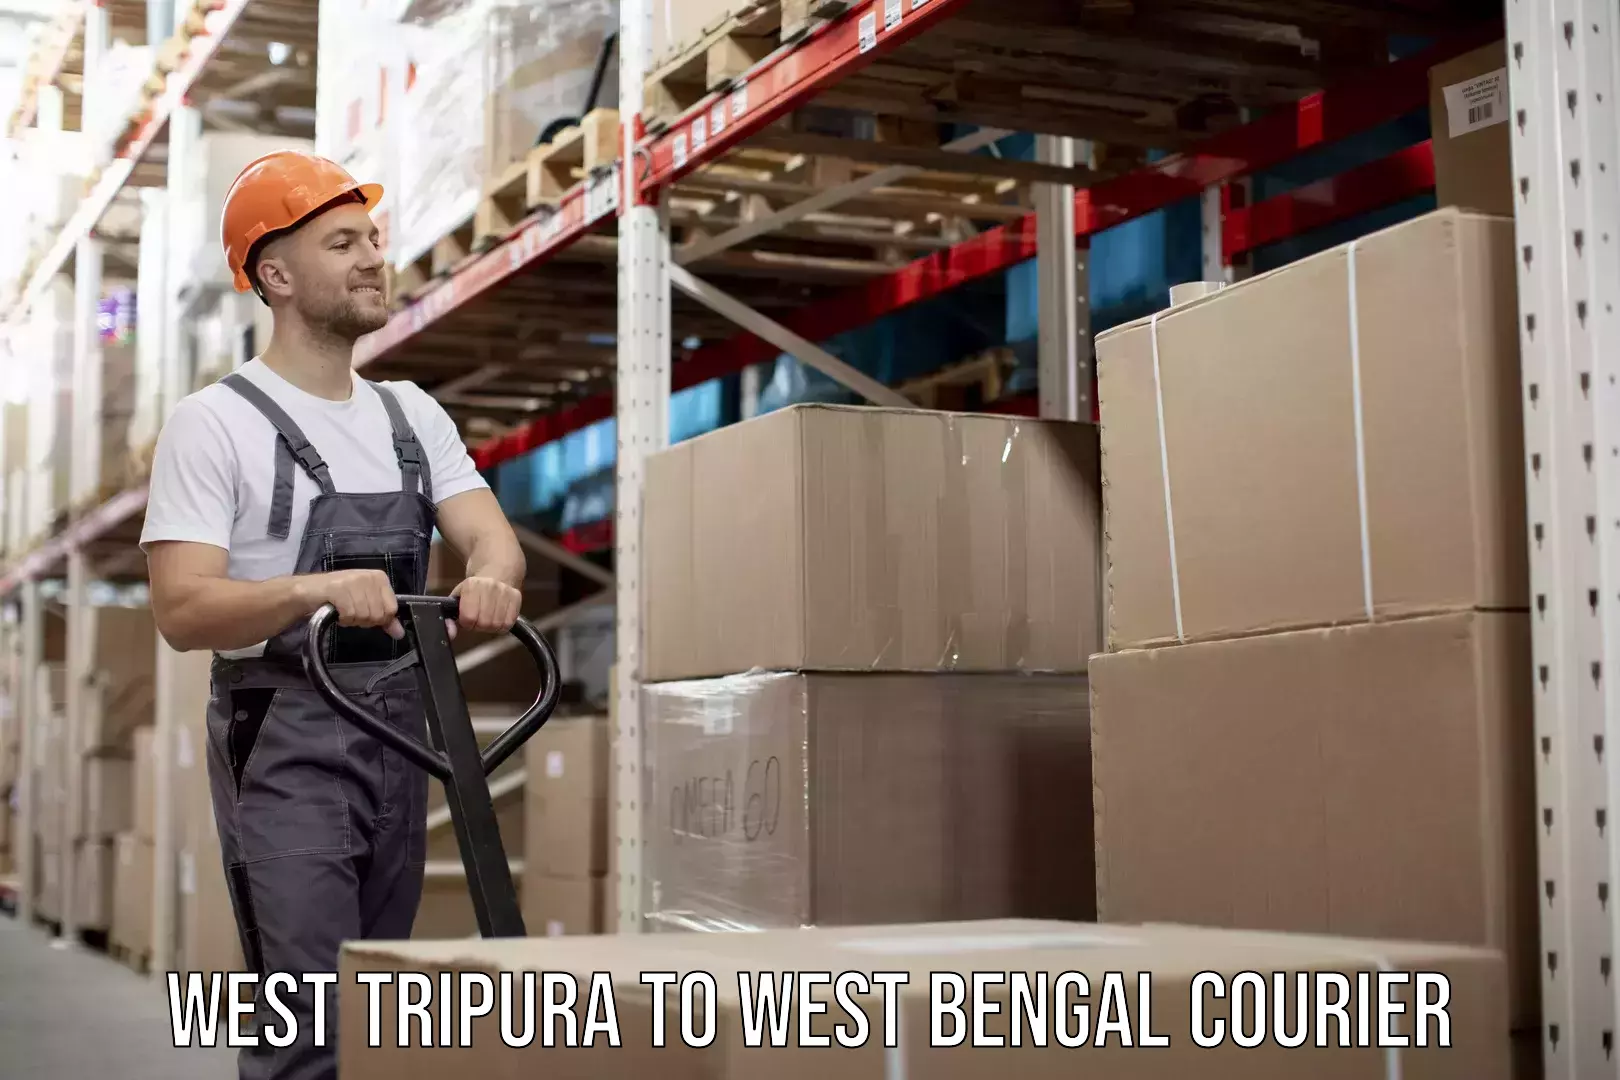 Express logistics providers West Tripura to West Bengal